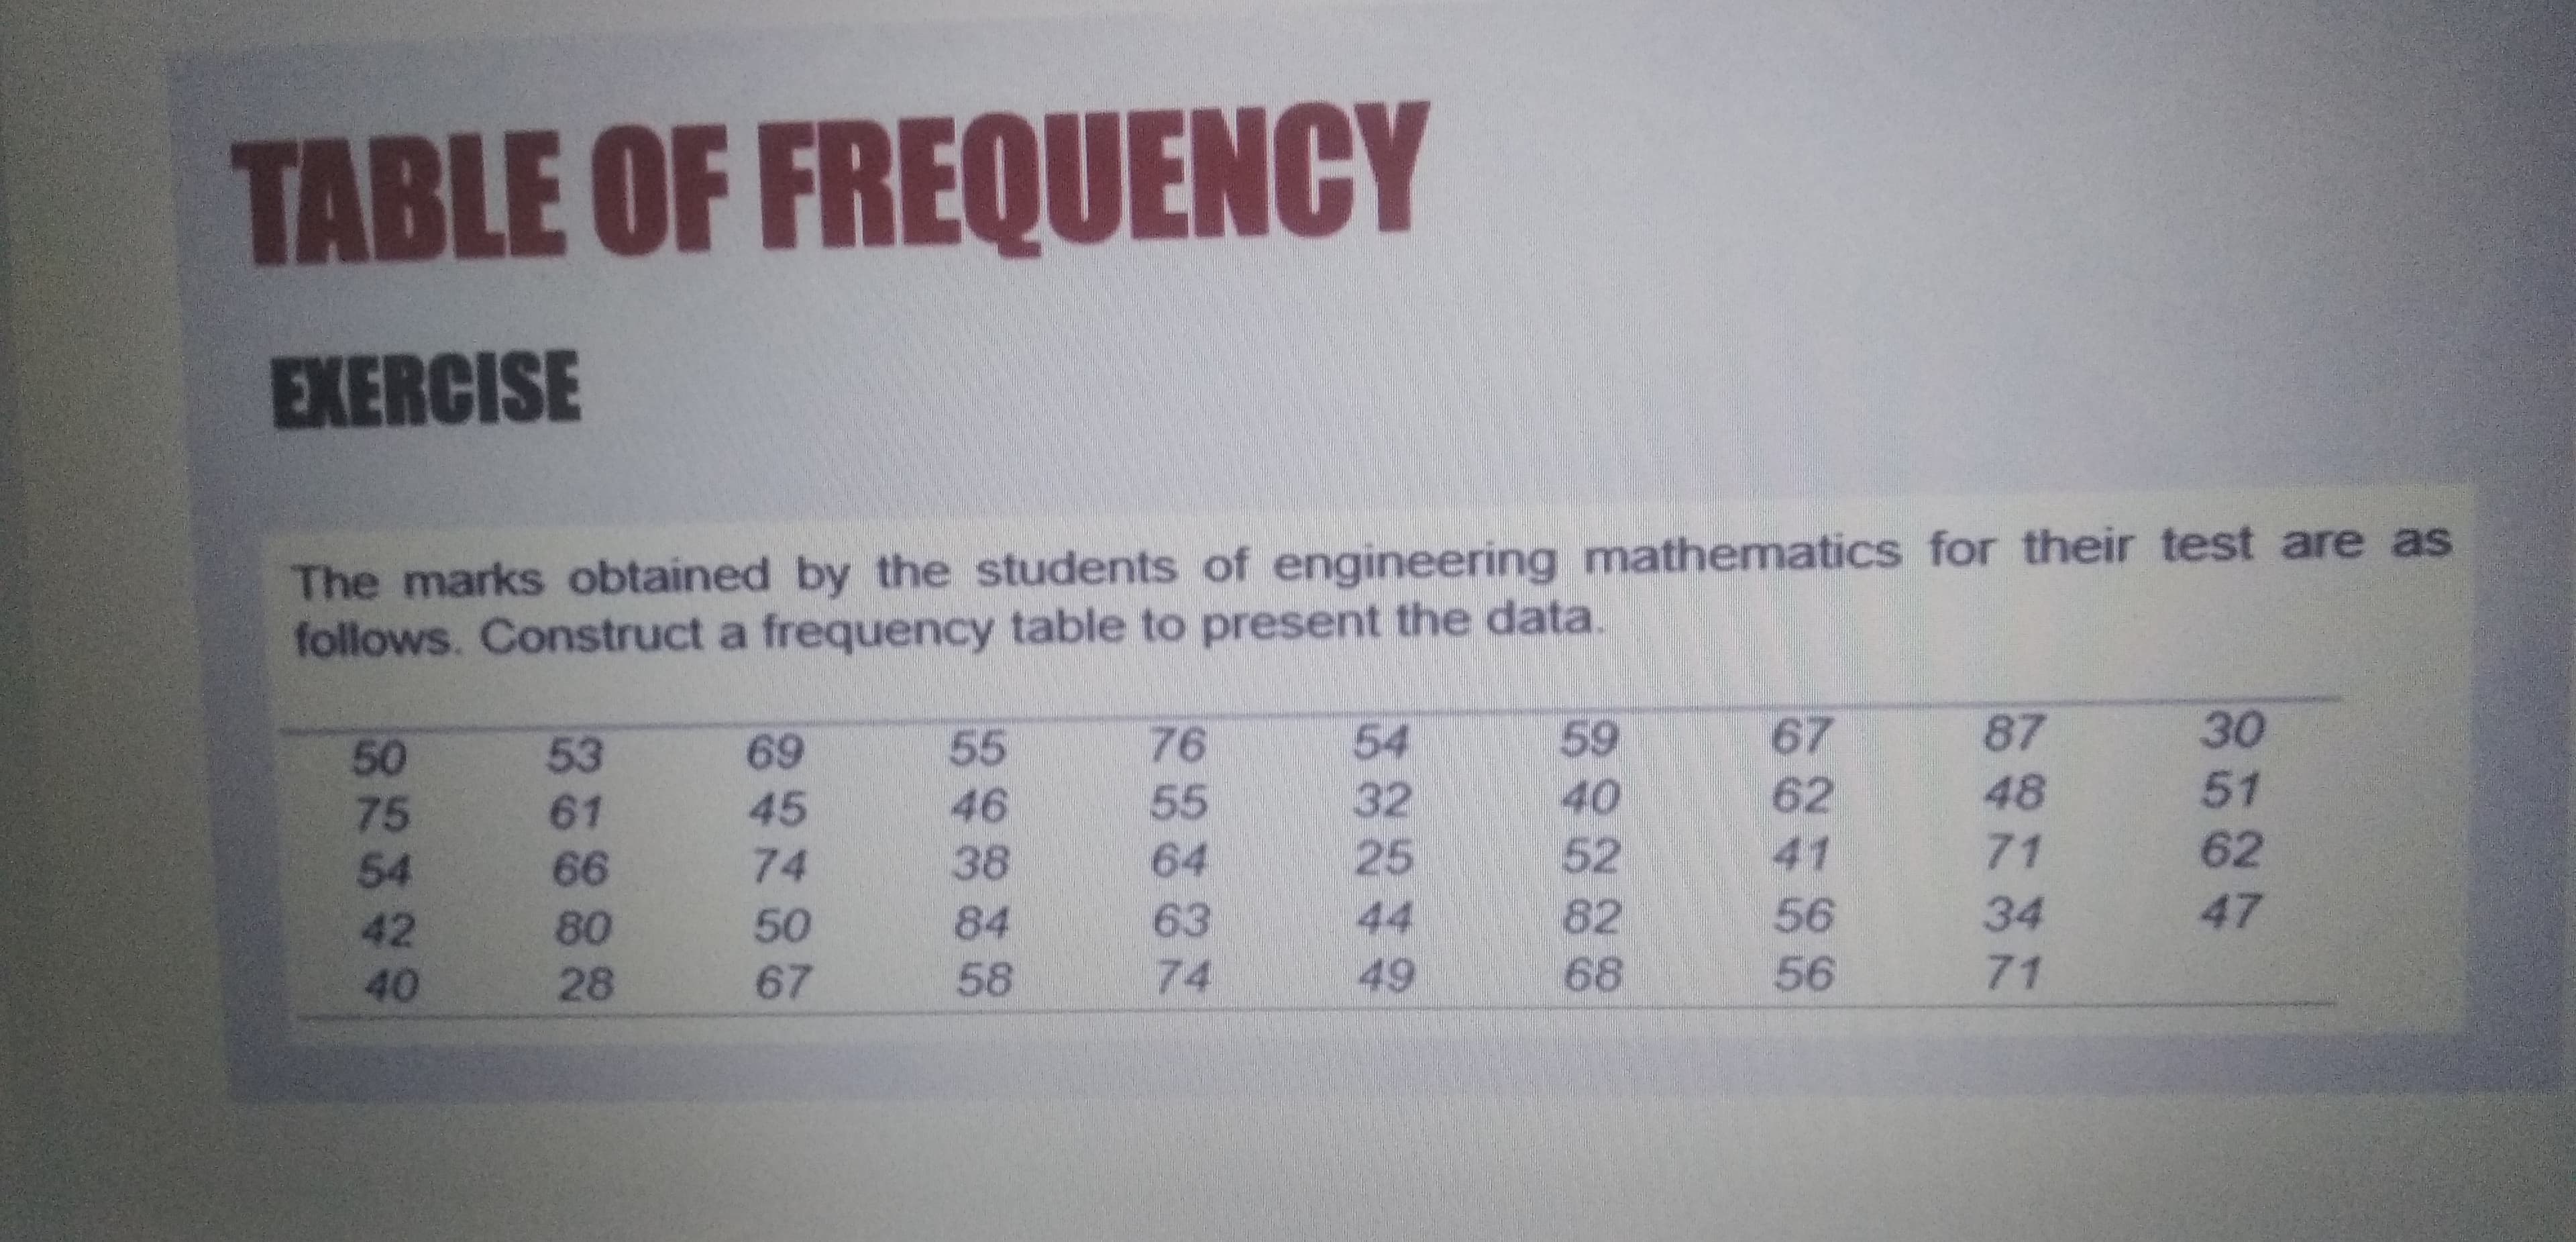 The marks obtained by the students of engineering mathematics for their test are as
follows. Construct a frequency table to present the data.
30
67
62
54
87
55
46
59
40
52
53
69
50
75
54
51
62
48
32
25
44
49
61
45
66
74
38
64
41
71
50
84
63
82
56
34
47
80
28
42
40
67
58
74
68
56
71
